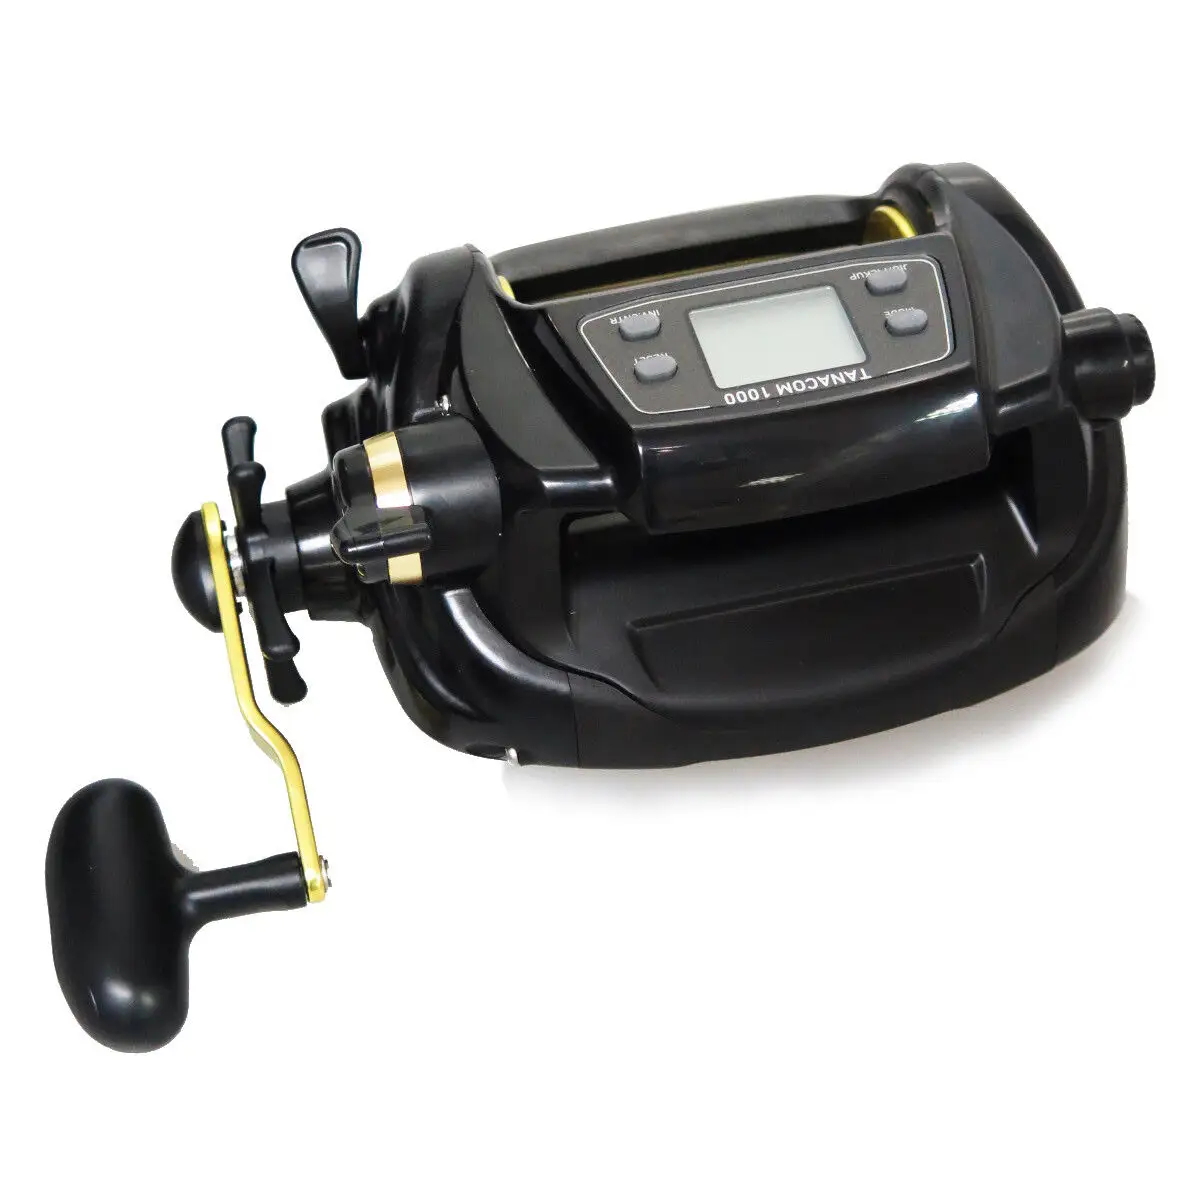 Amazing Price Offer For Daiwas Tanacom 1000 Big Game Electronic Fishing Reel English Display shipping now for Worldwide Delivery